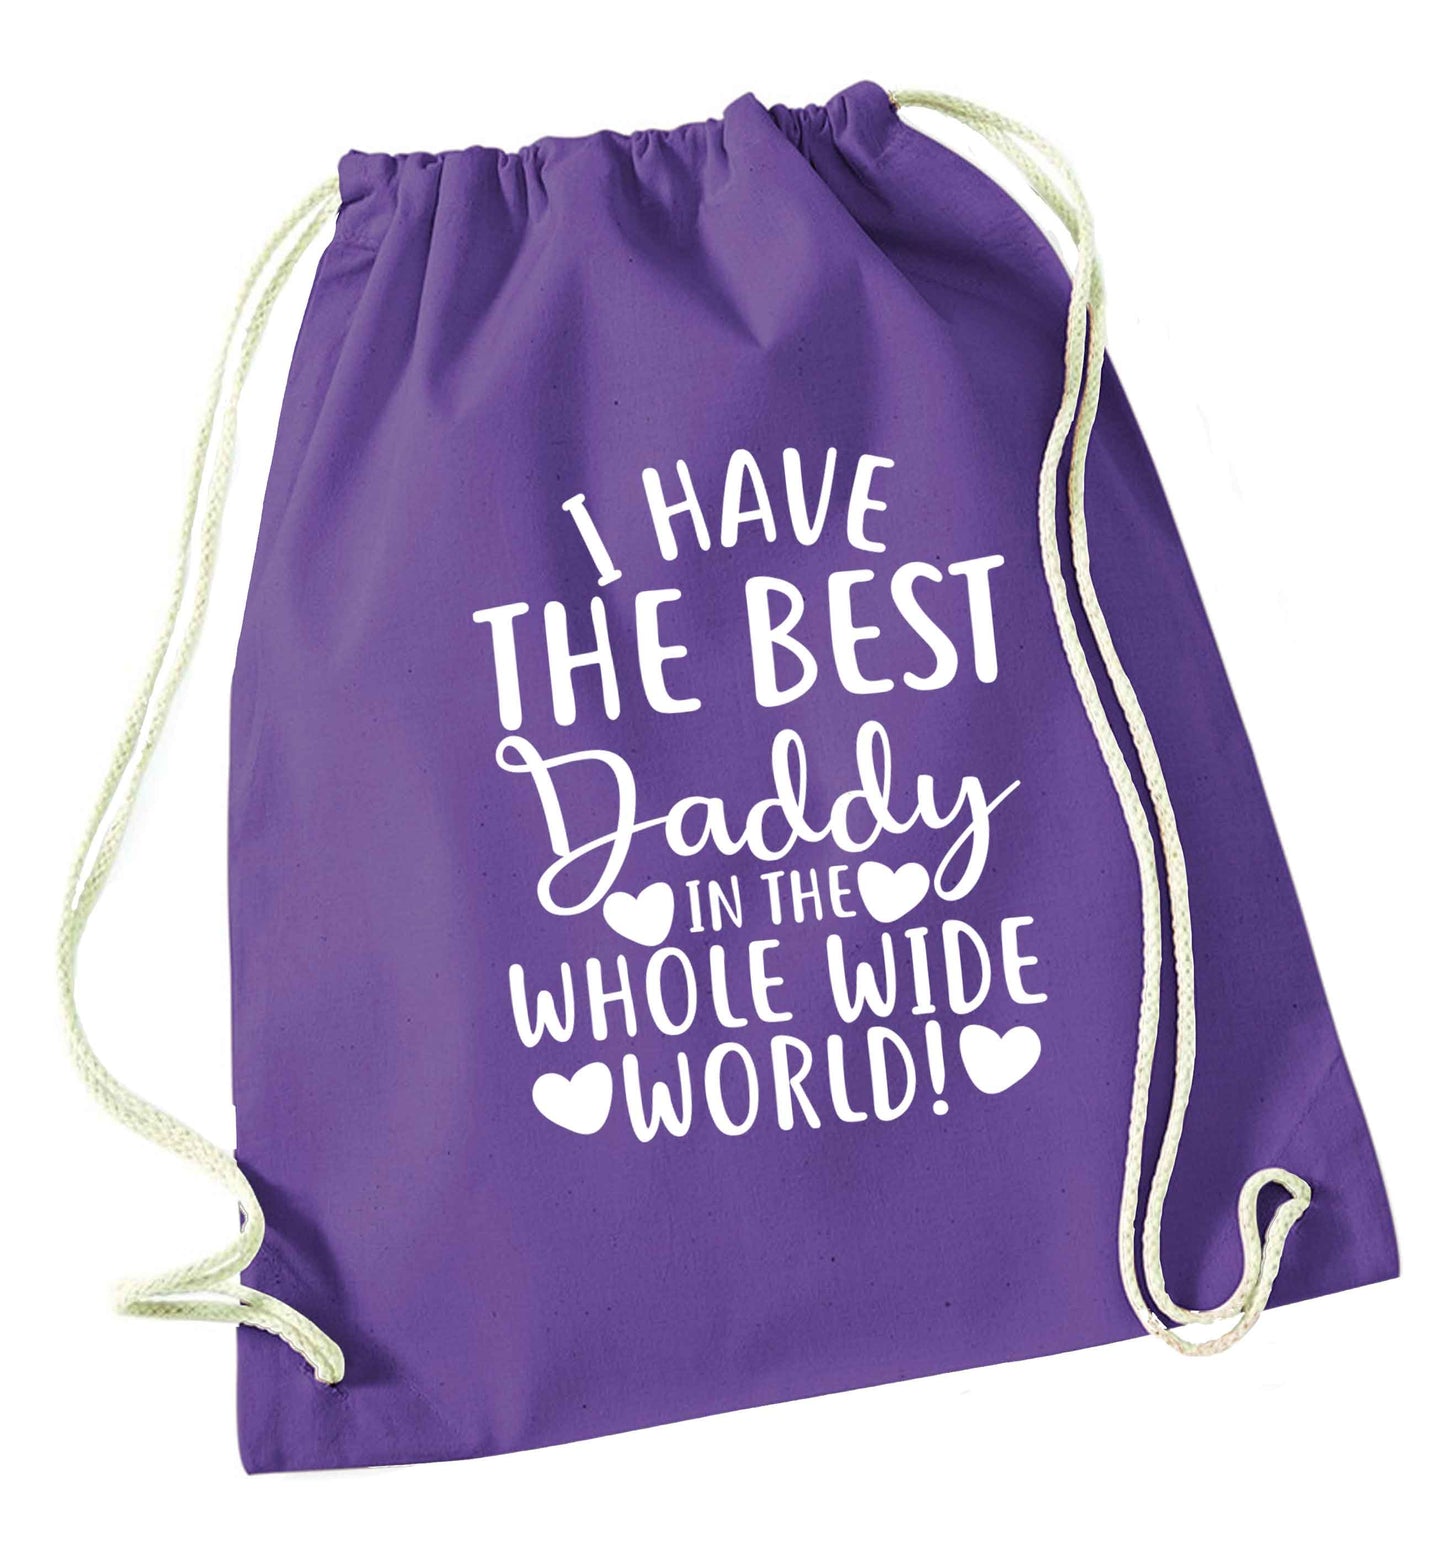 I have the best daddy in the whole wide world purple drawstring bag